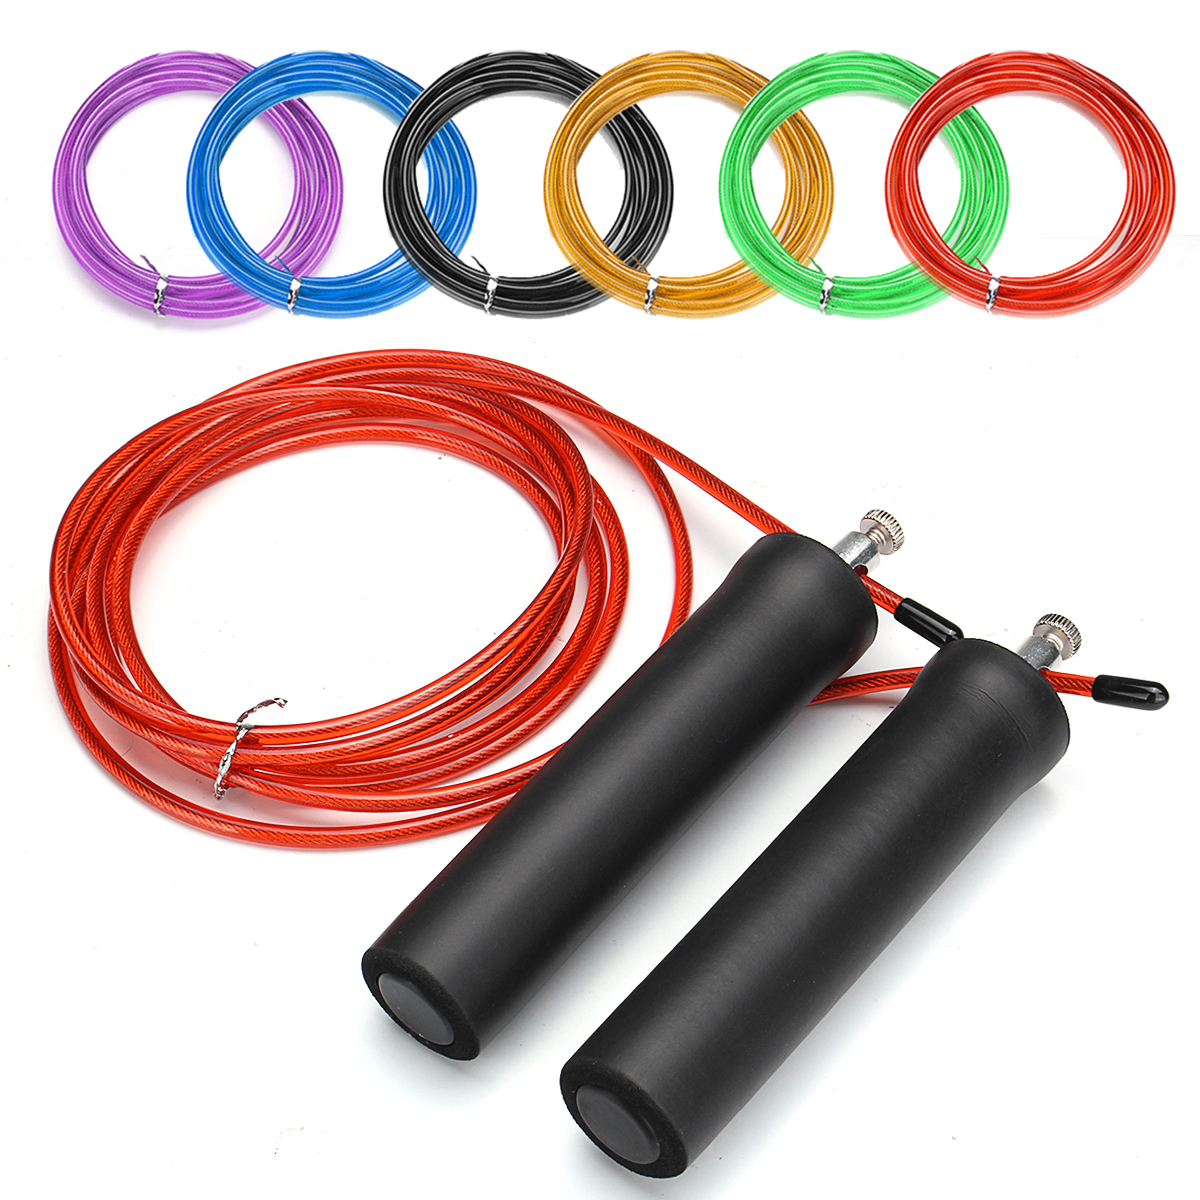 3M-Steel-Wire-Speed-Skipping-Rope-Jumping-Rope-Adjustable-Crossfit-Fitnesss-Exercise-1307727-2